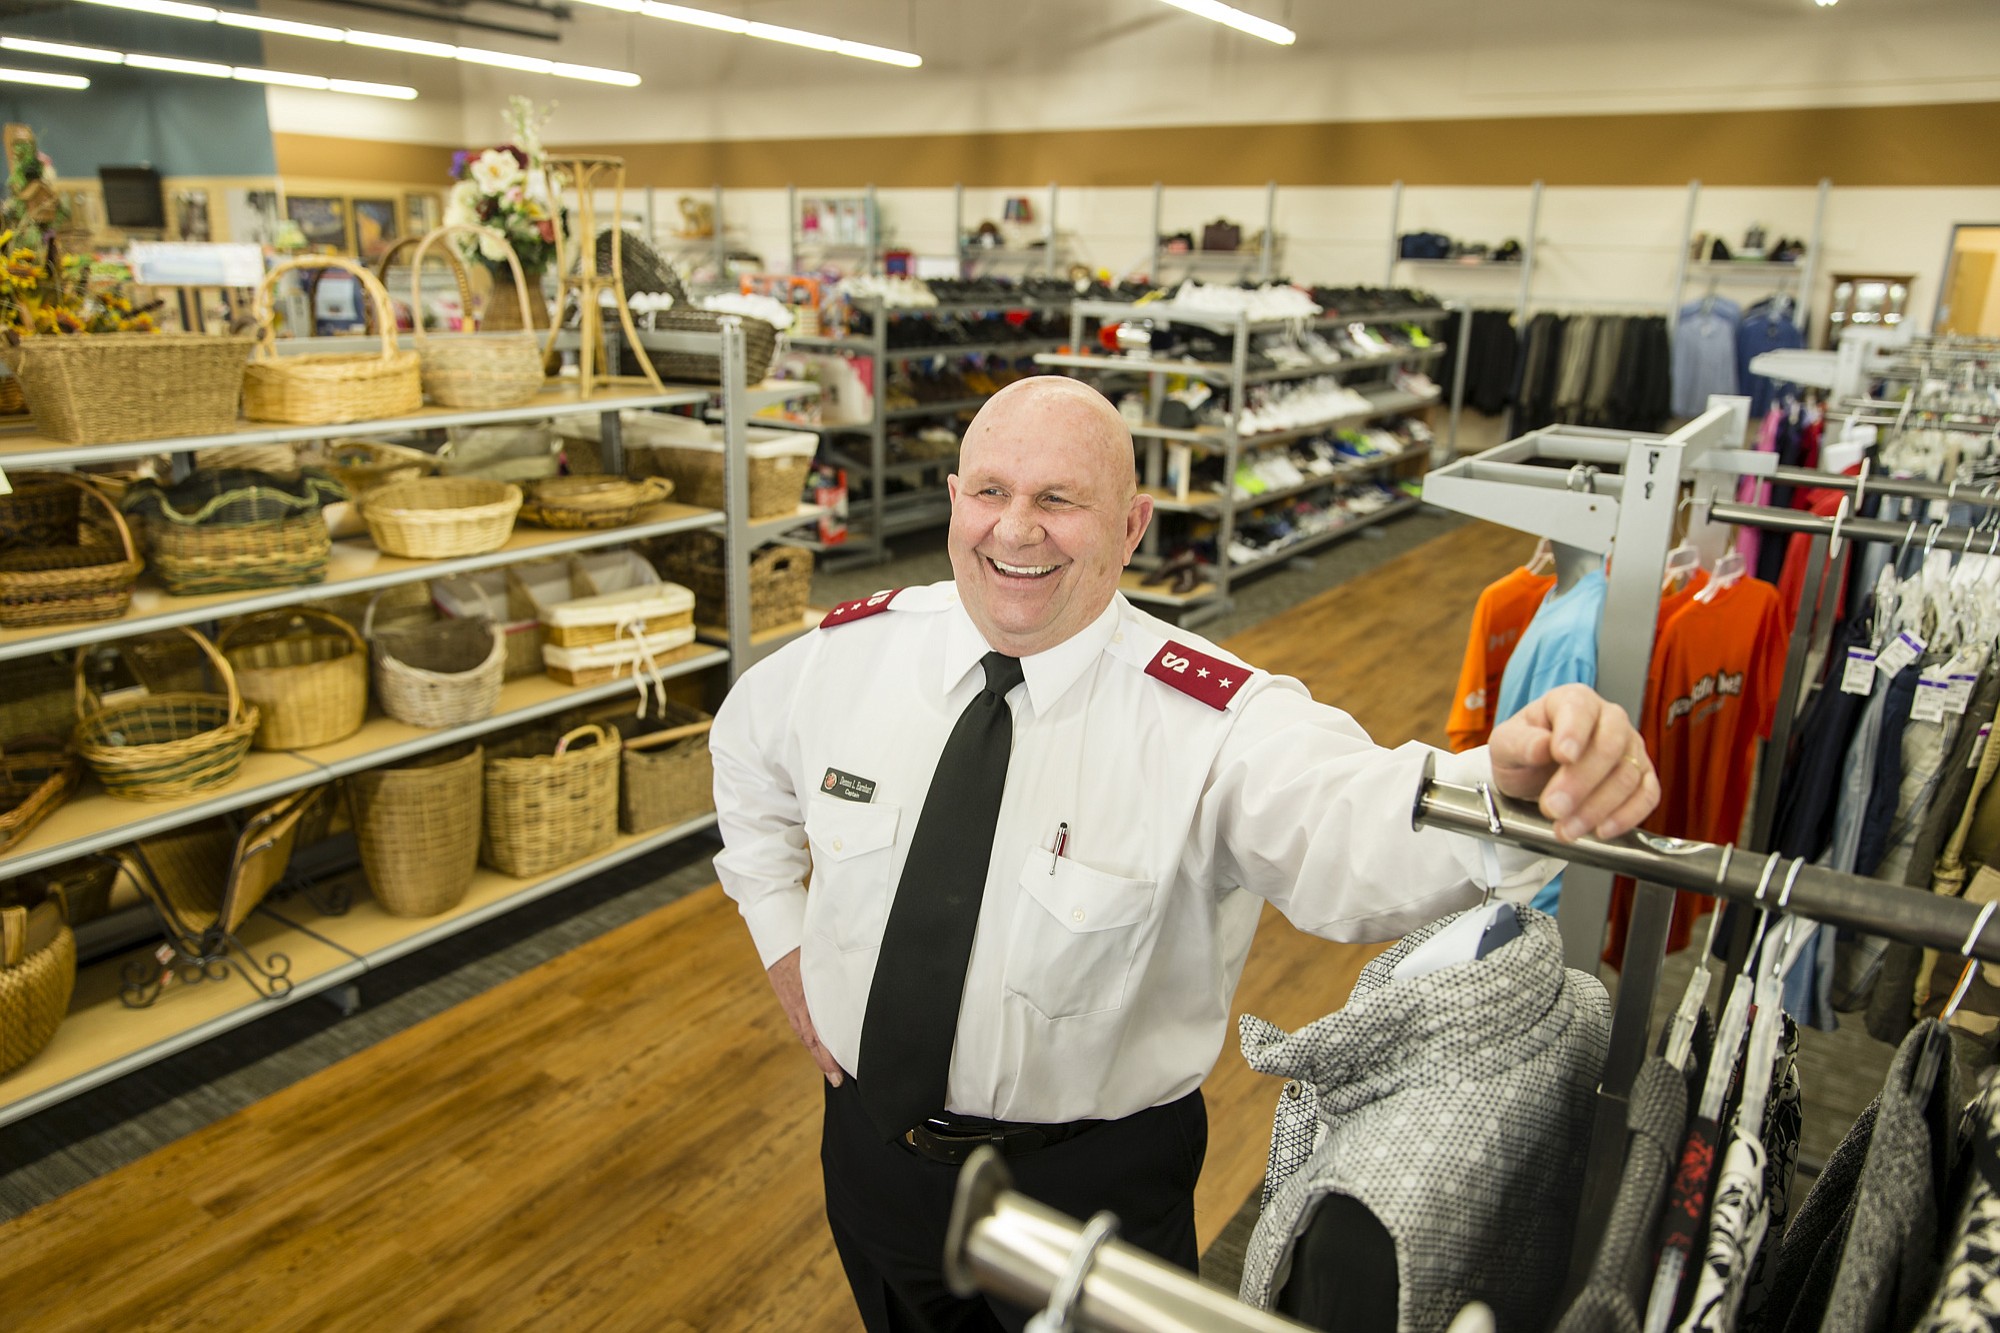 Salvation Army Capt. Dennis Earnhart discusses the new 'family store' on Northeast Fourth Plain Boulevard on Monday.